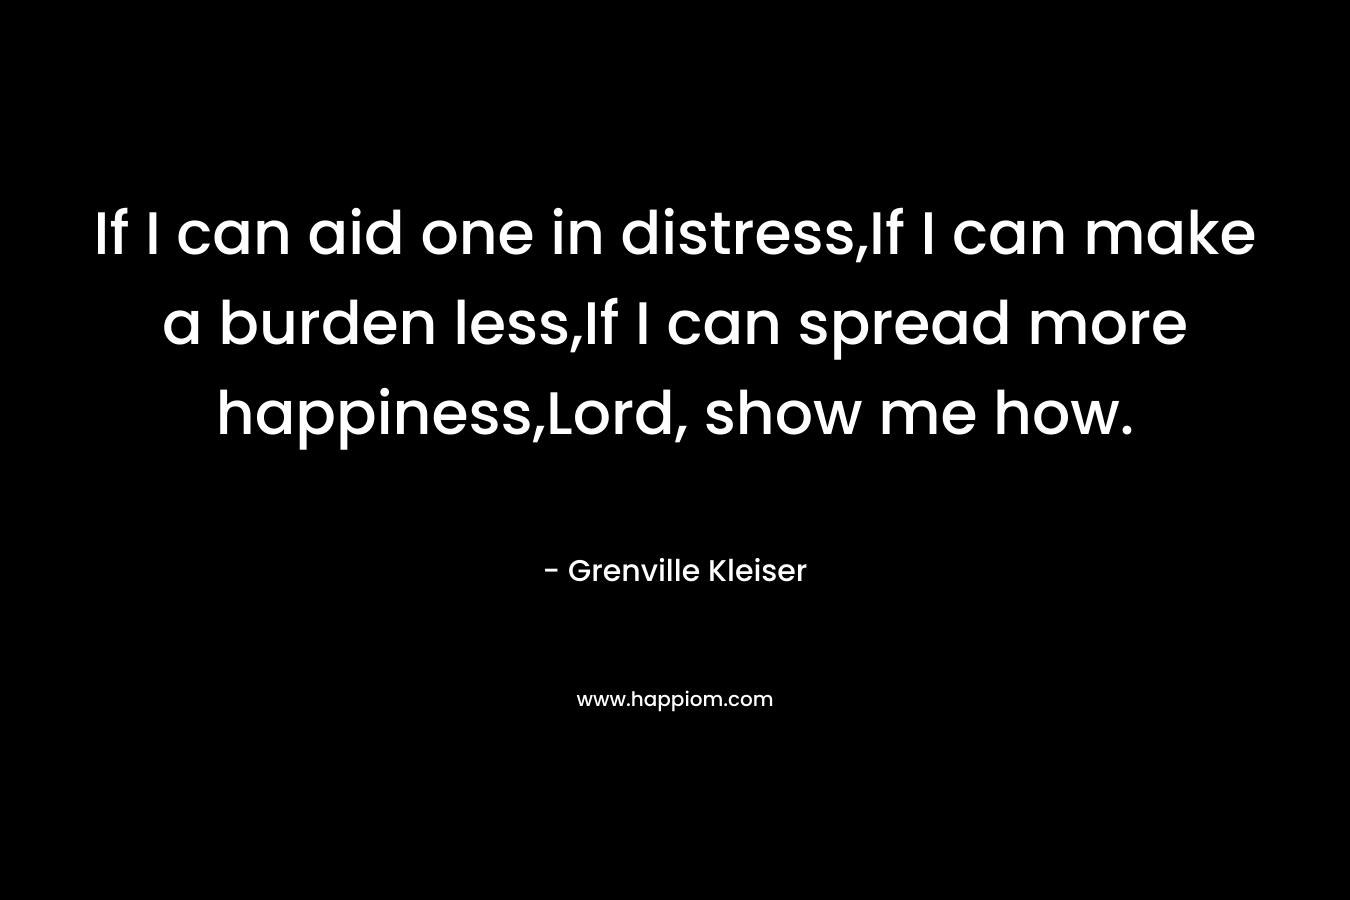 If I can aid one in distress,If I can make a burden less,If I can spread more happiness,Lord, show me how.